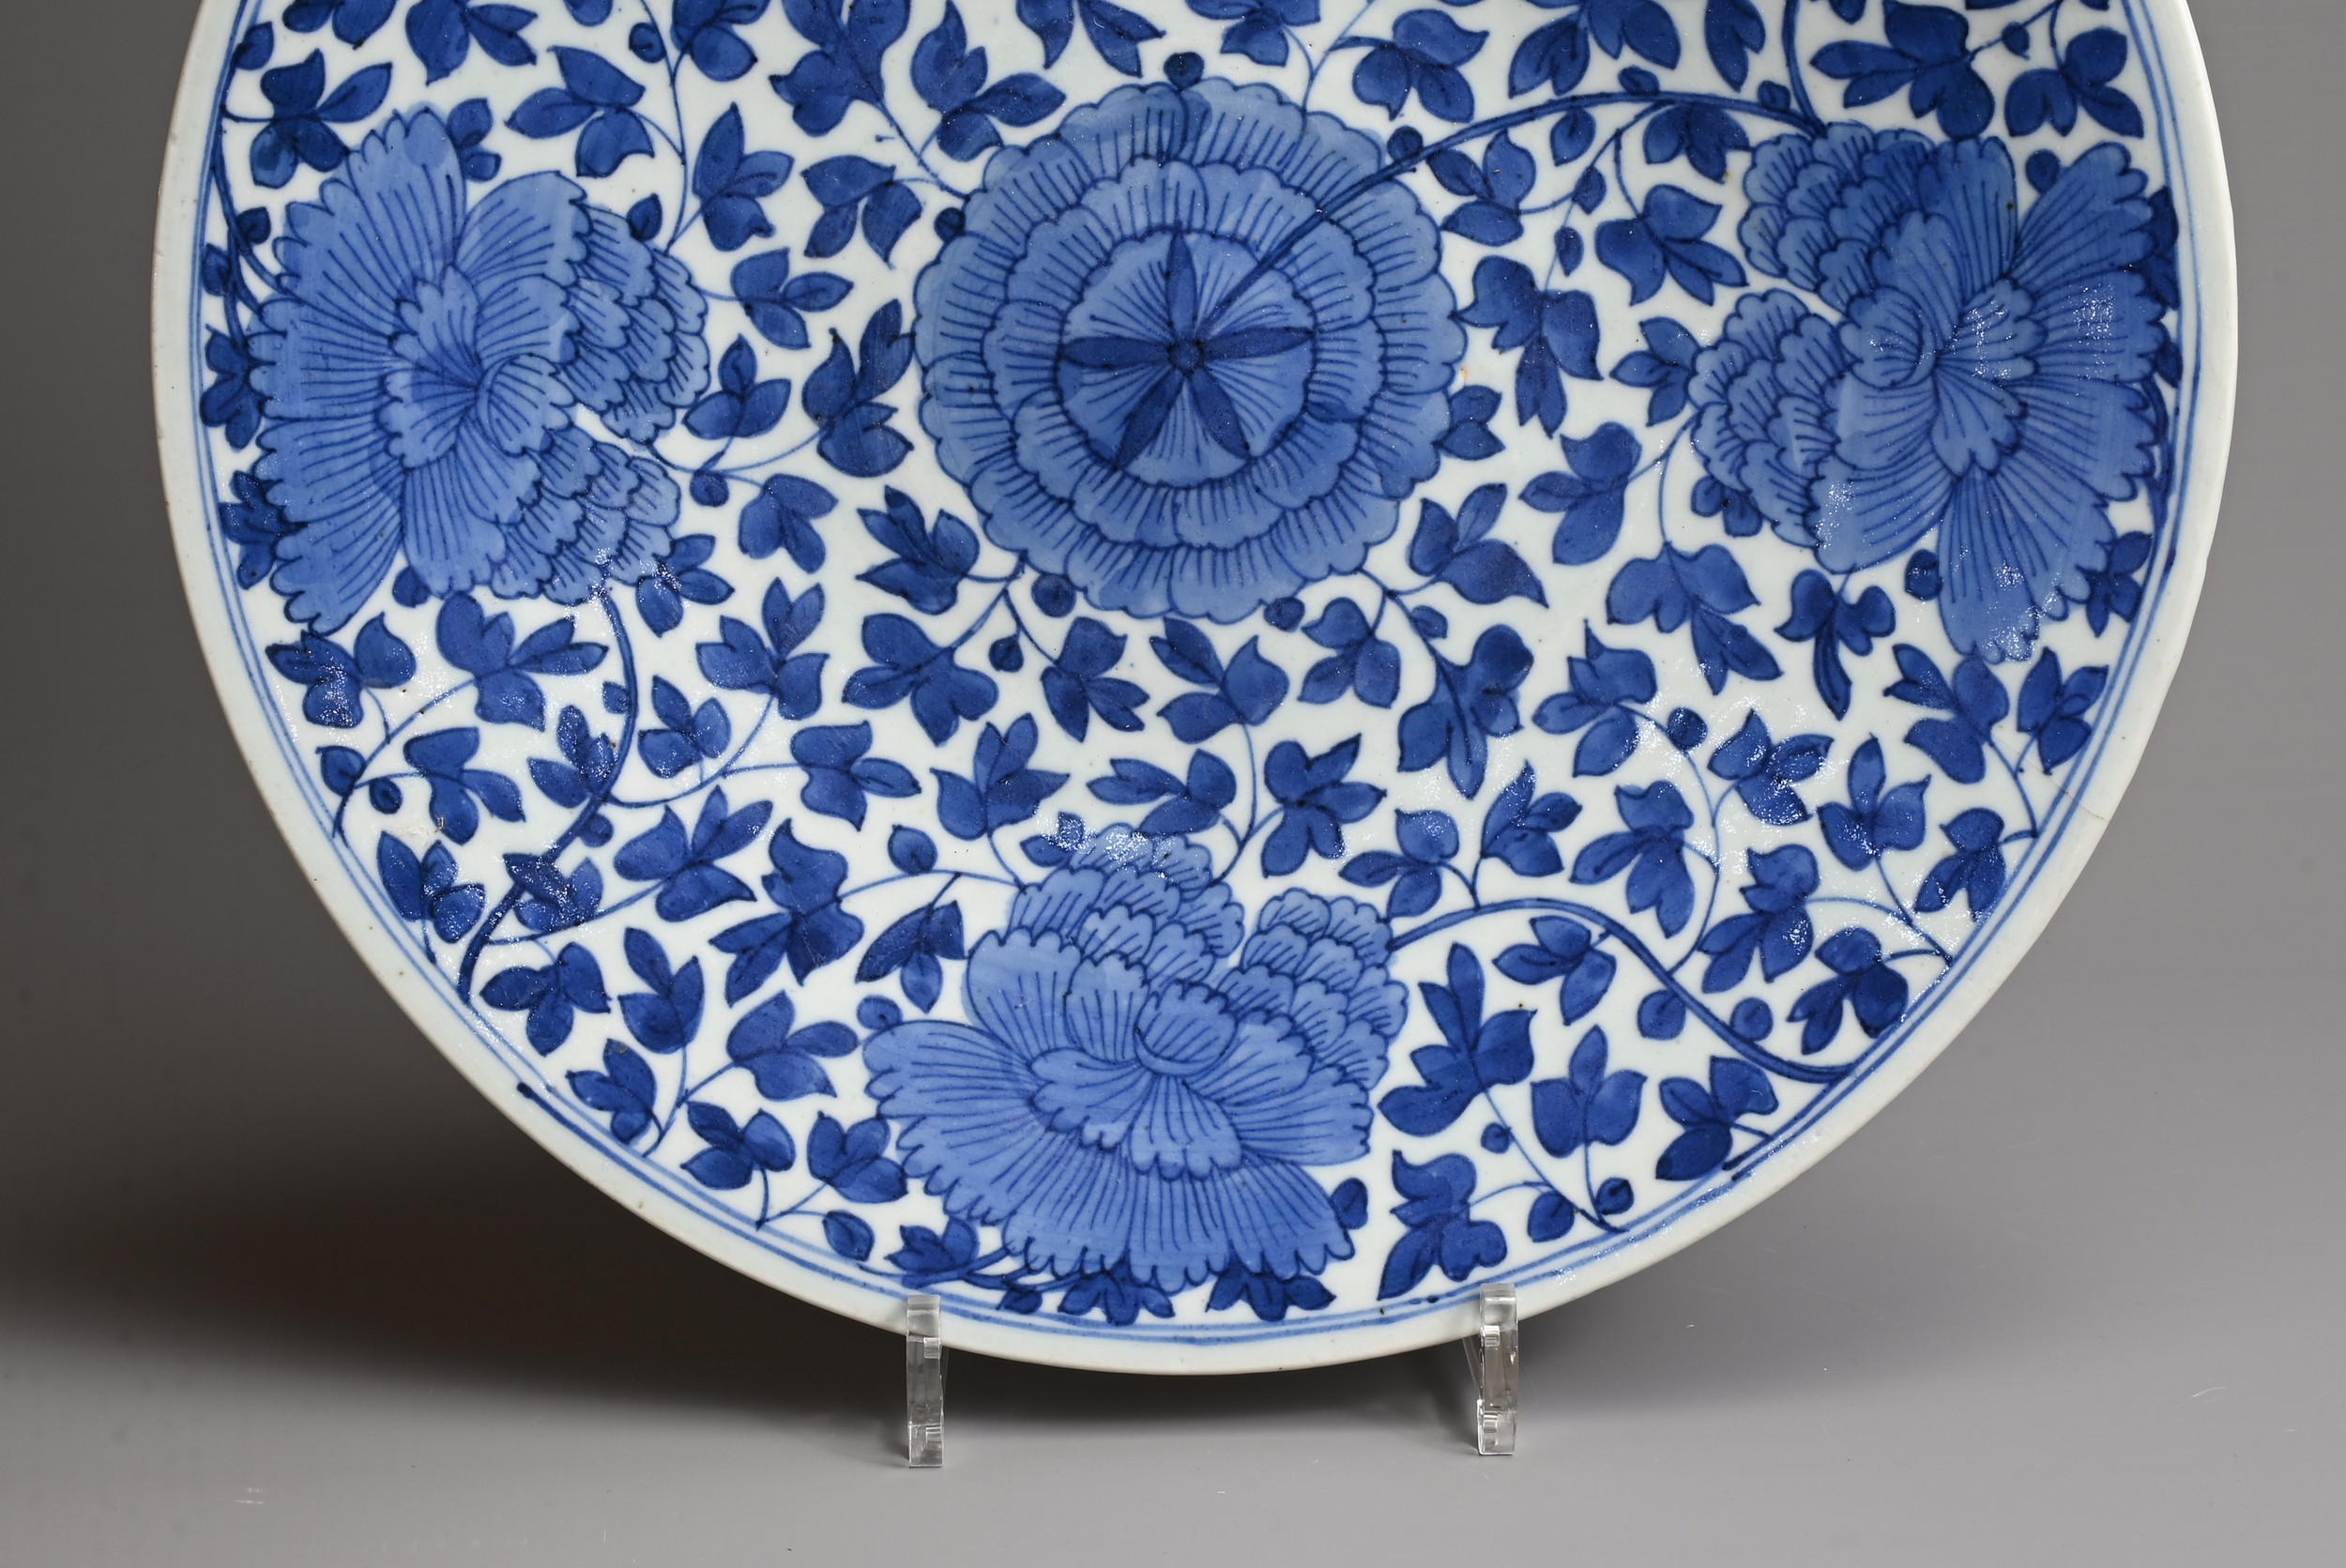 A LARGE CHINESE BLUE AND WHITE PORCELAIN DISH, QING DYNASTY. Decorated with large peony blooms - Image 3 of 8